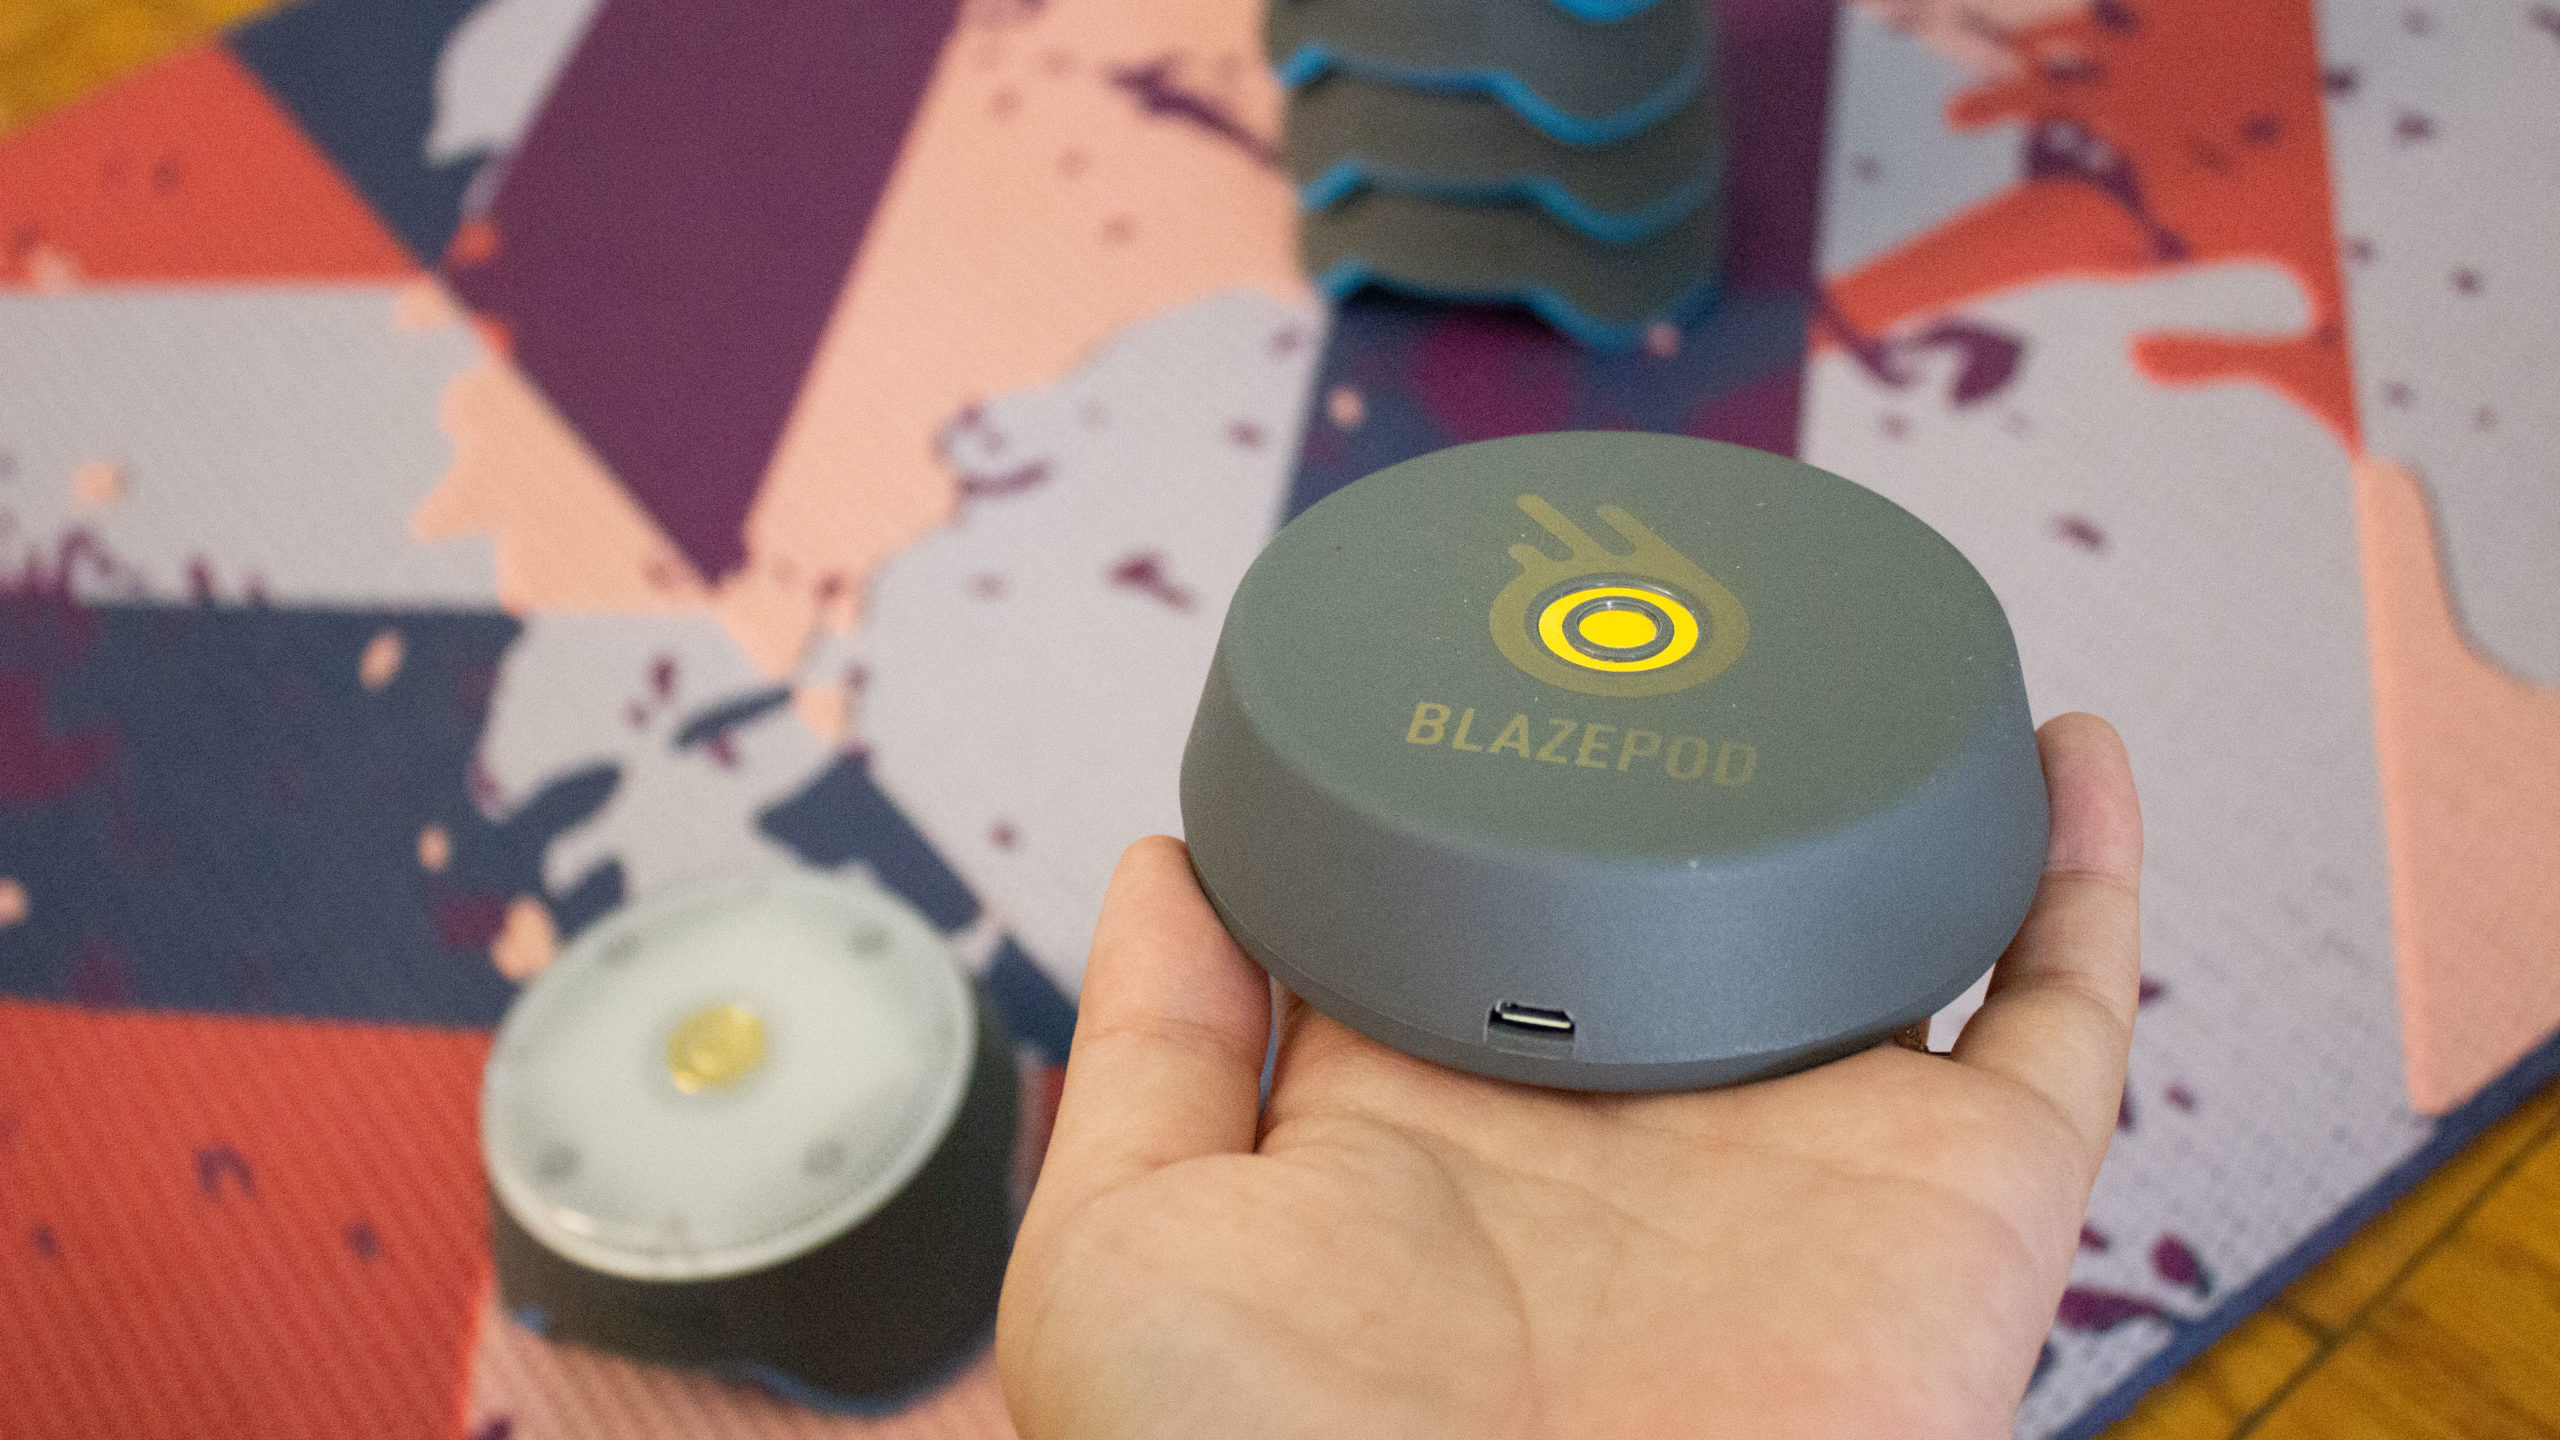 The BlazePod charging base. You stack each pod on top while the base is plugged in via micro USB. (Photo: Victoria Song/Gizmodo)